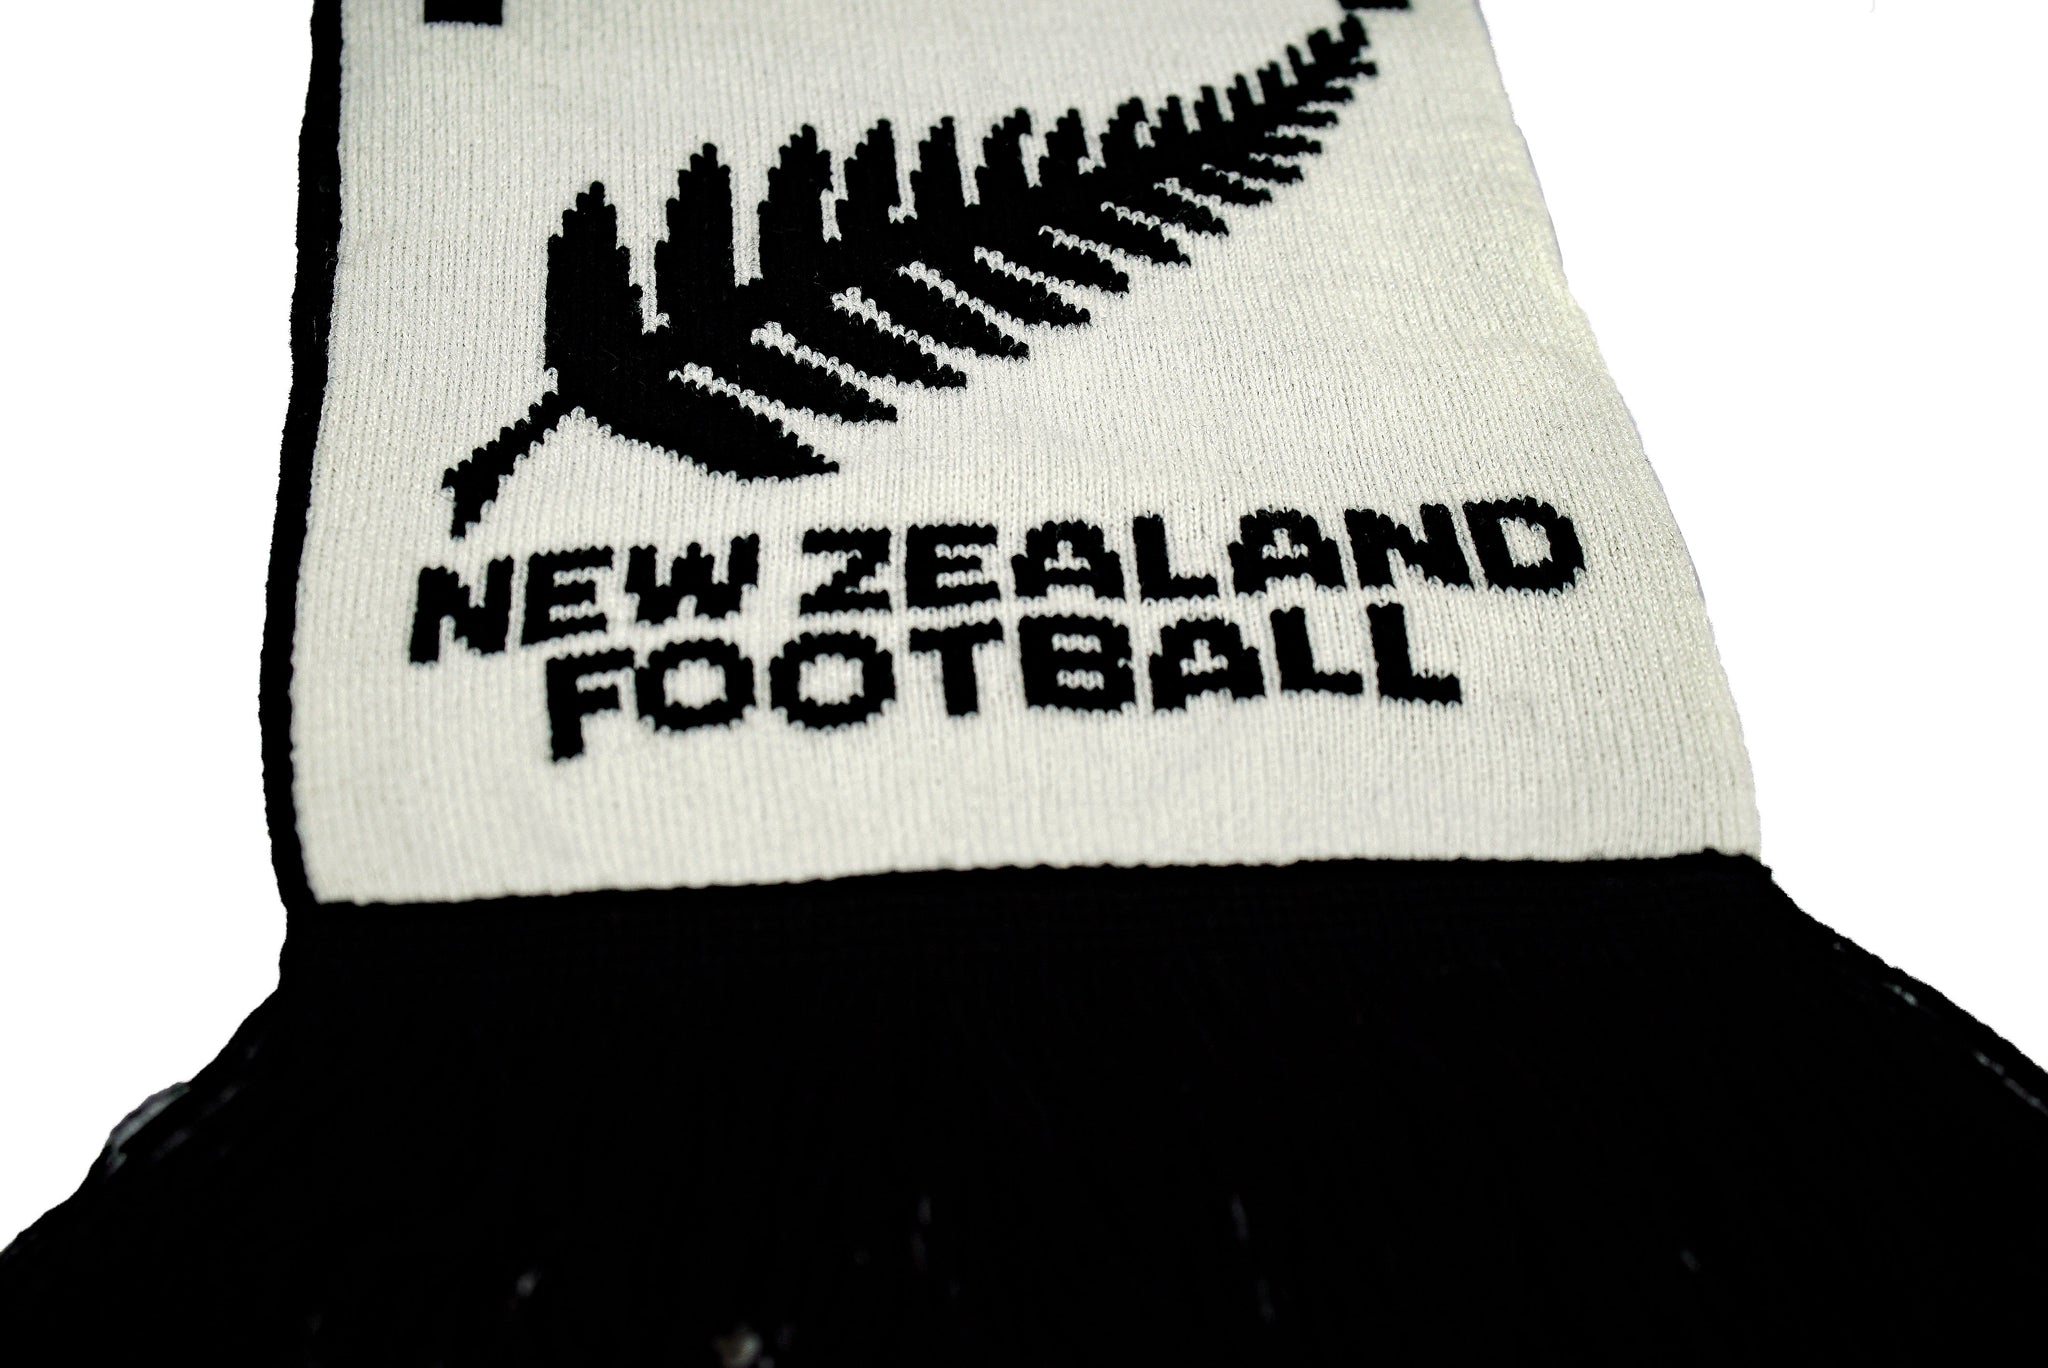 New Zealand Football All Whites Supporter Scarf